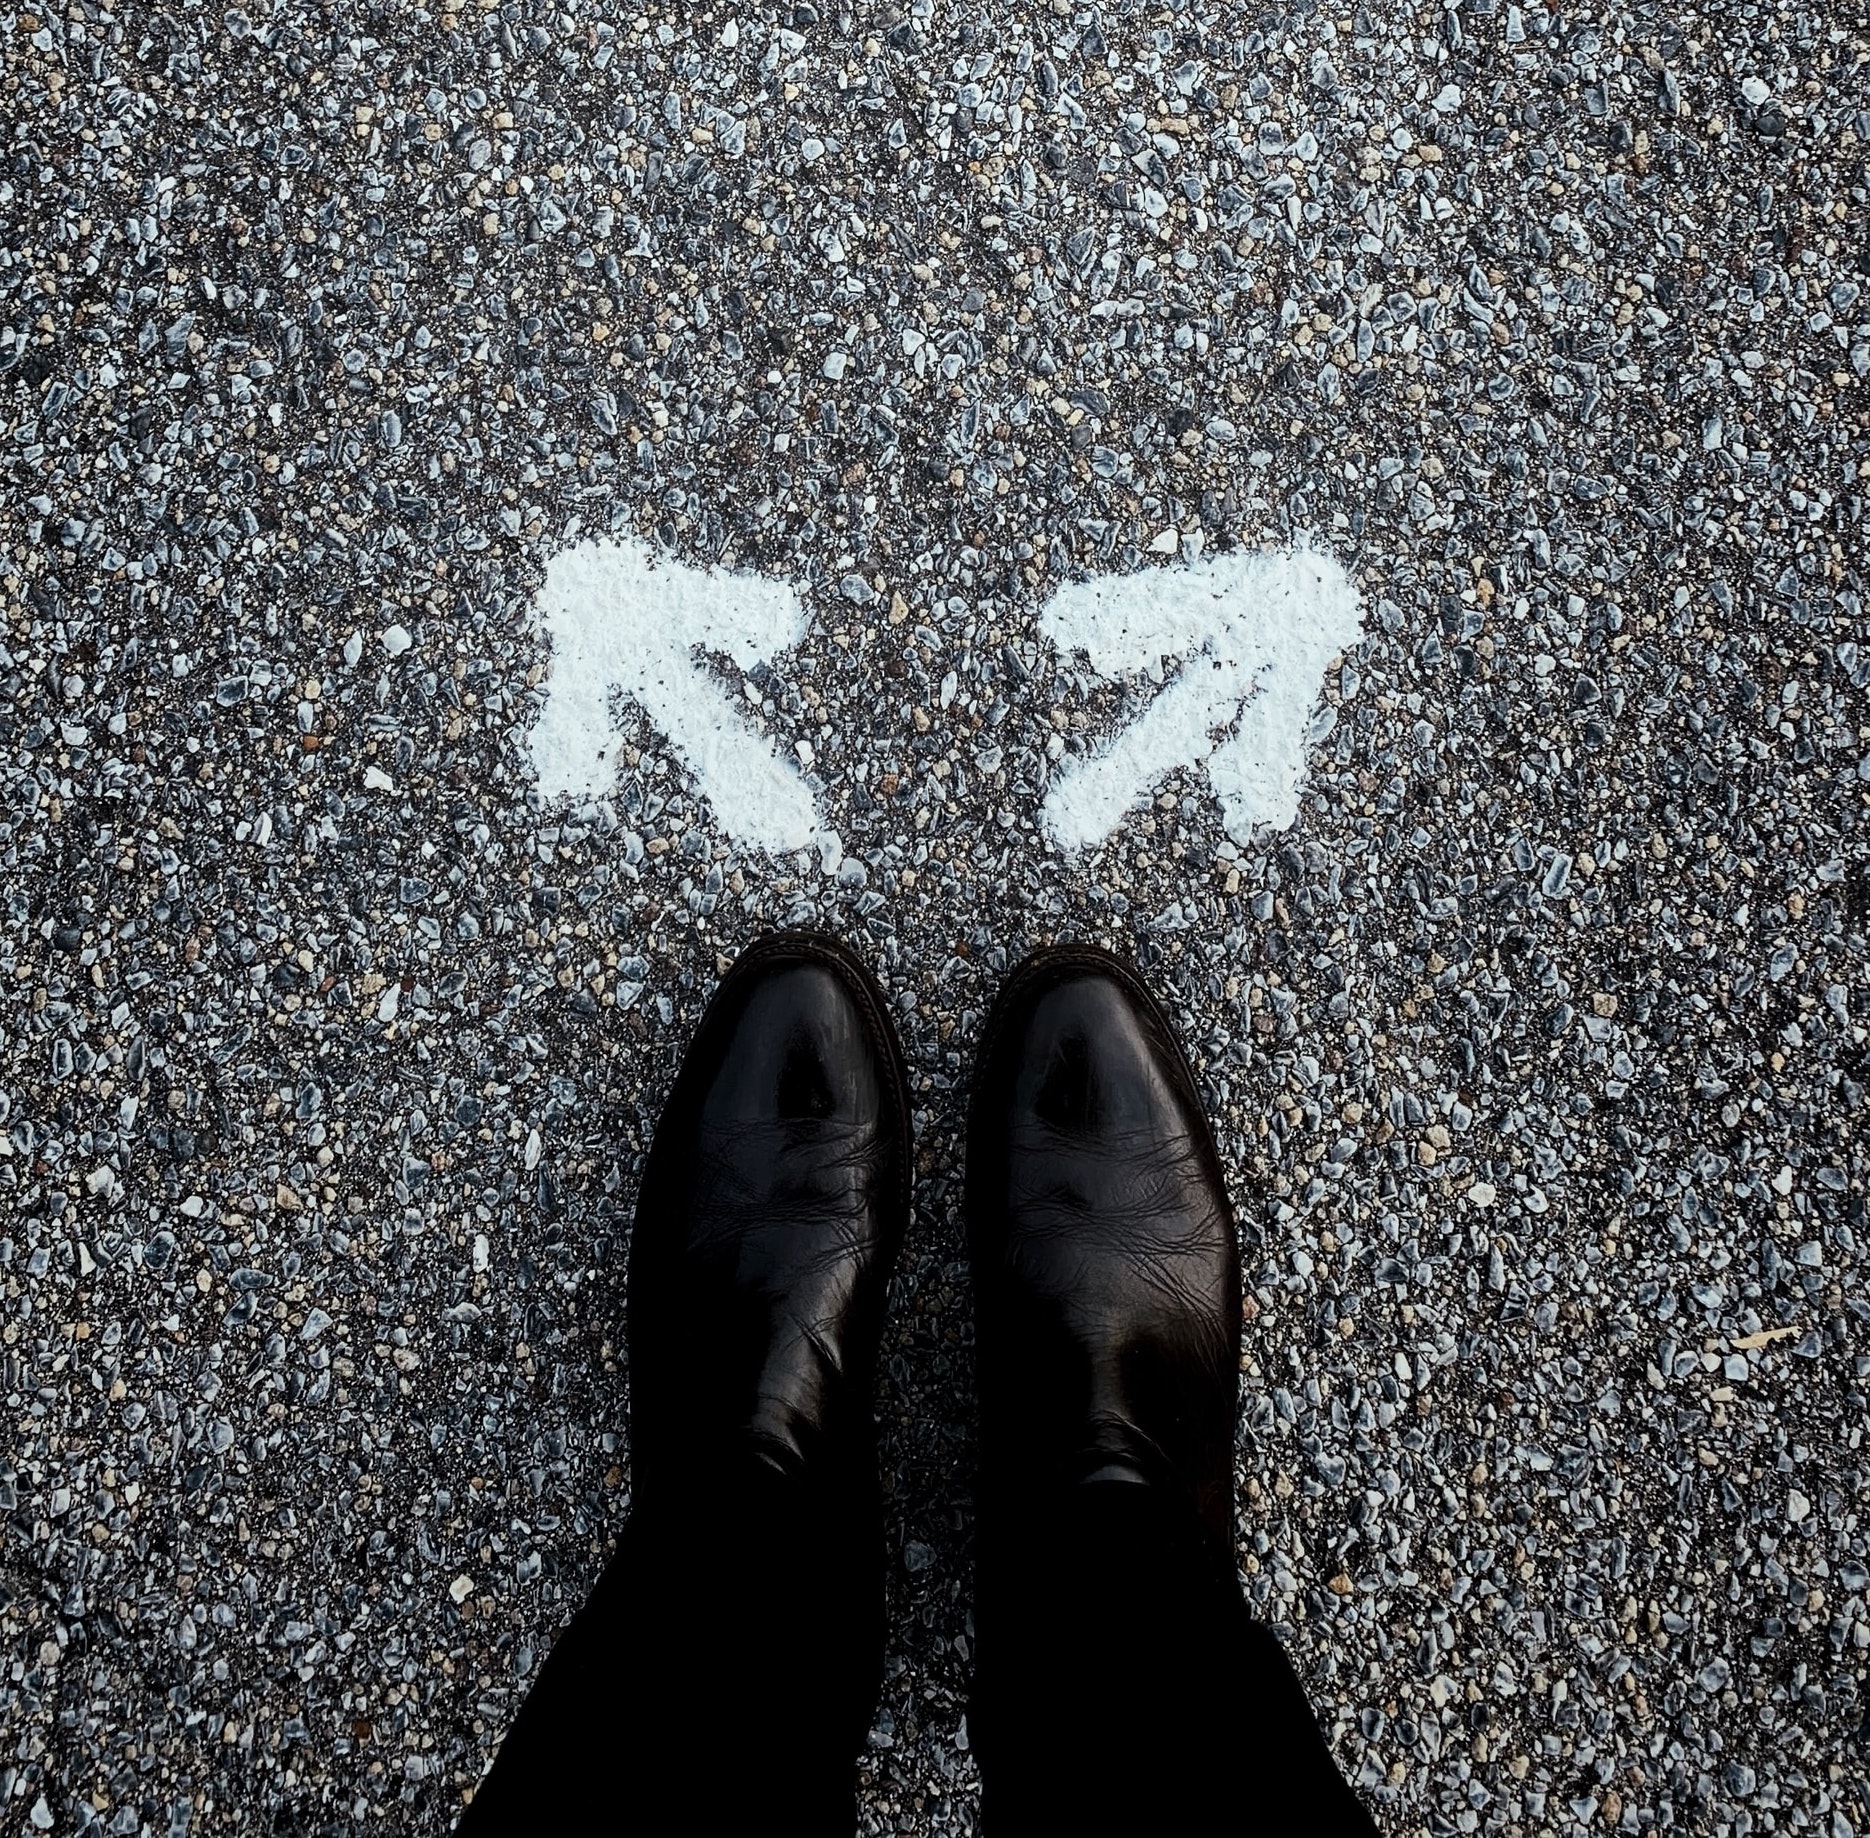 Photograph of feet with two arrows on the ground